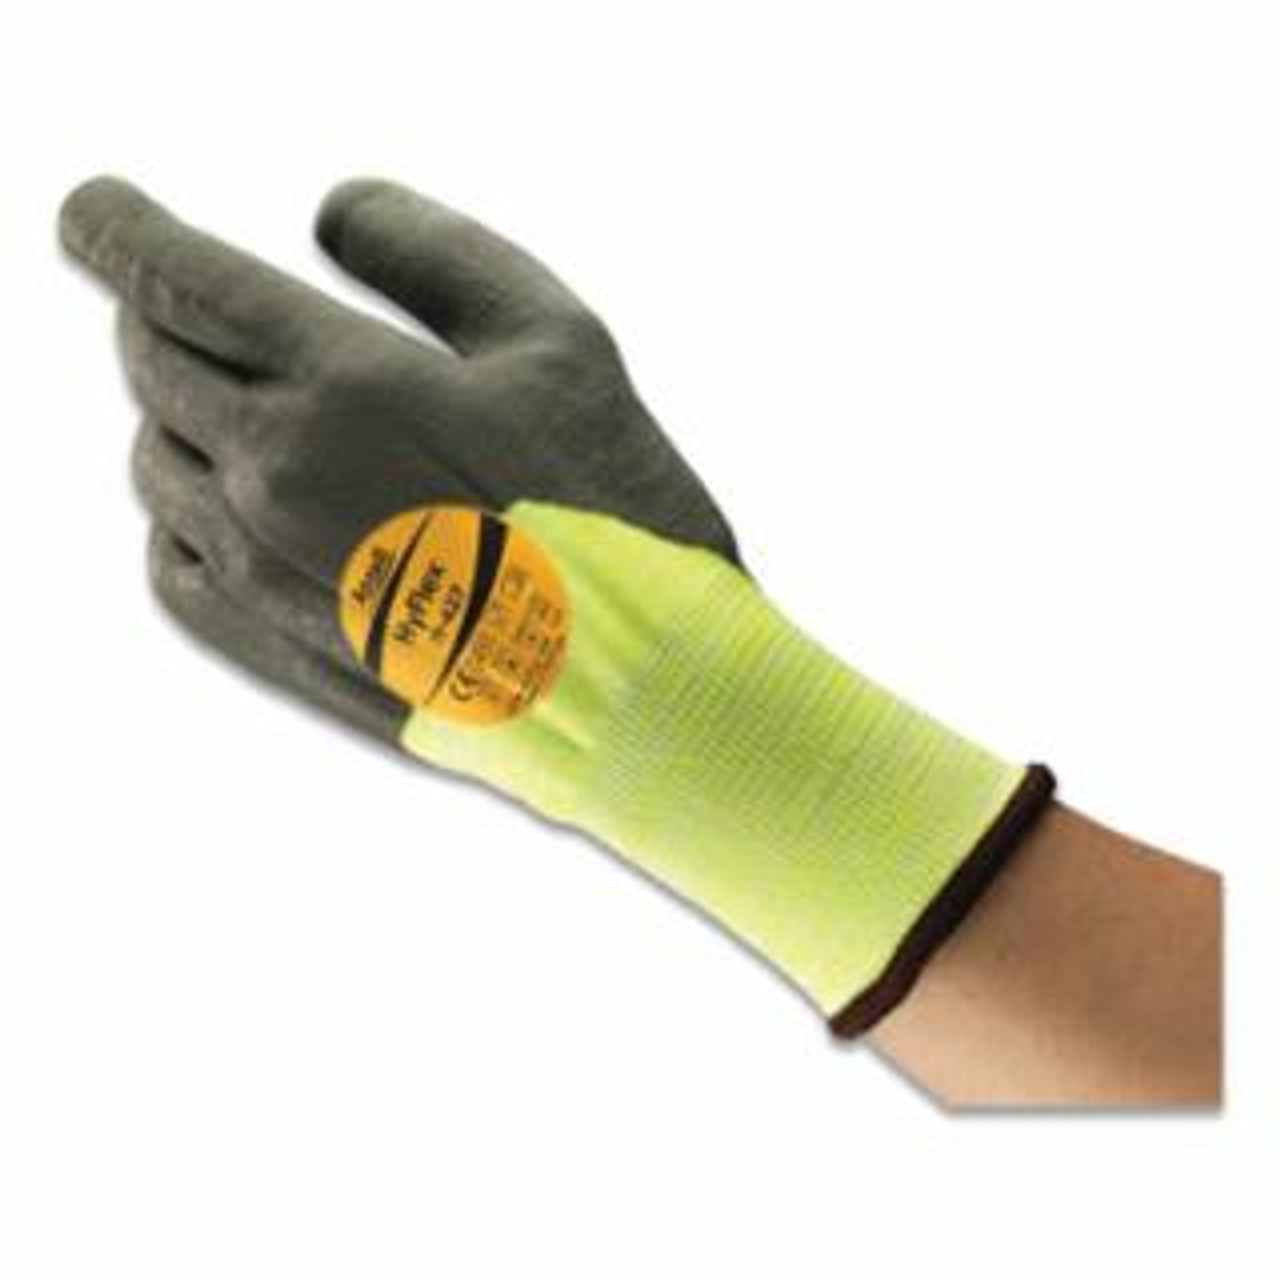 11-427 CUT AND PUNCTURE RESISTANT GLOVES, SIZE 10, YELLOW/BLACK